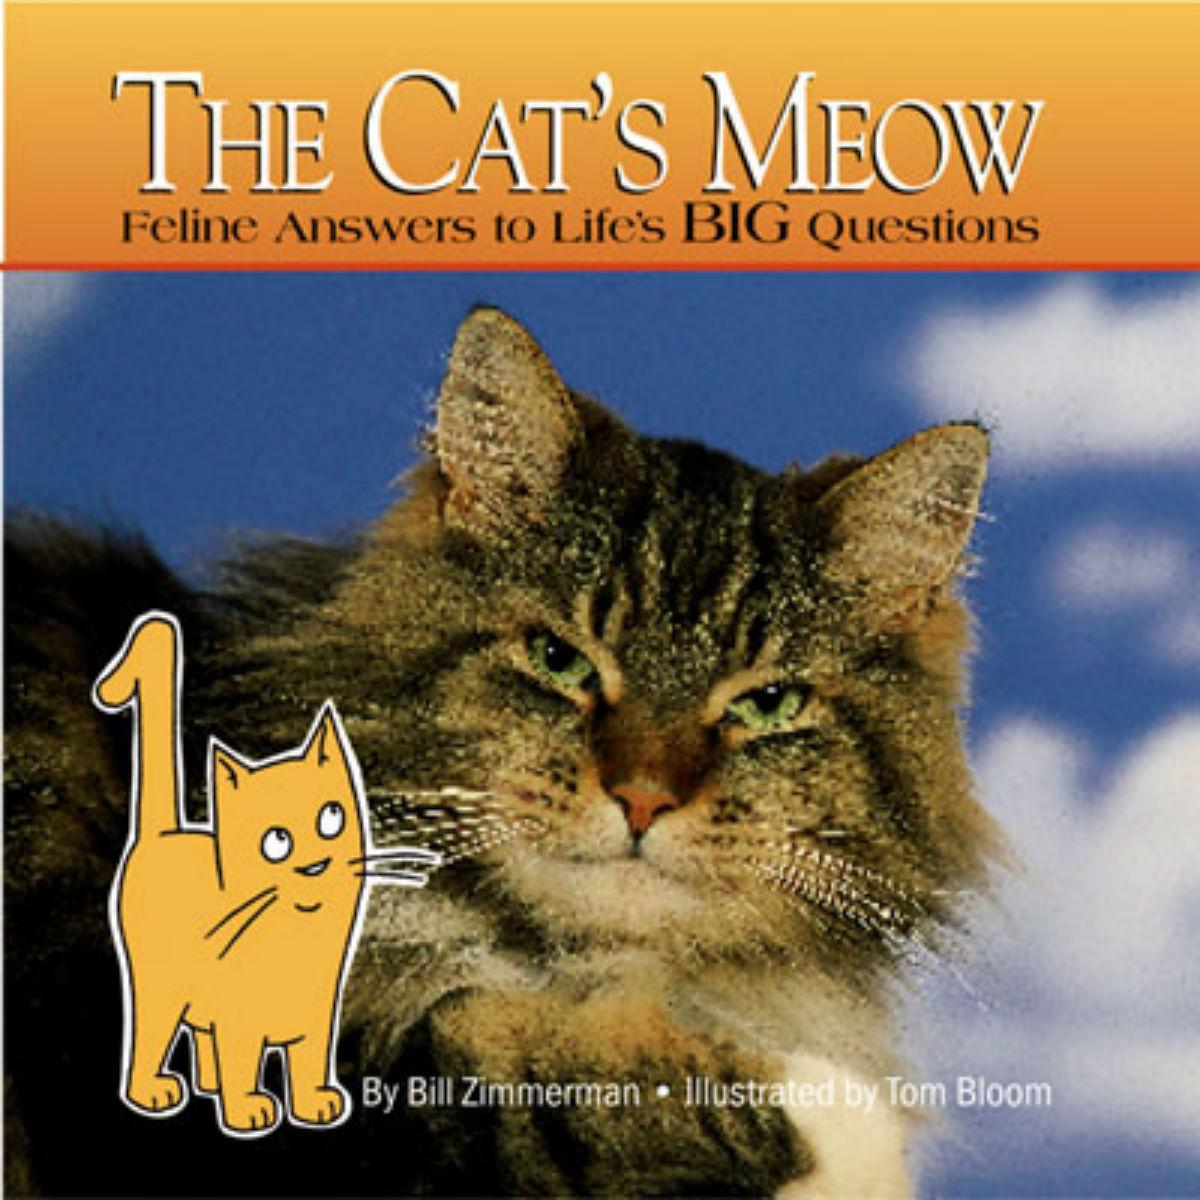 The Cat's Meow Book for Humans; Feline Answers to Life's BIG Questions